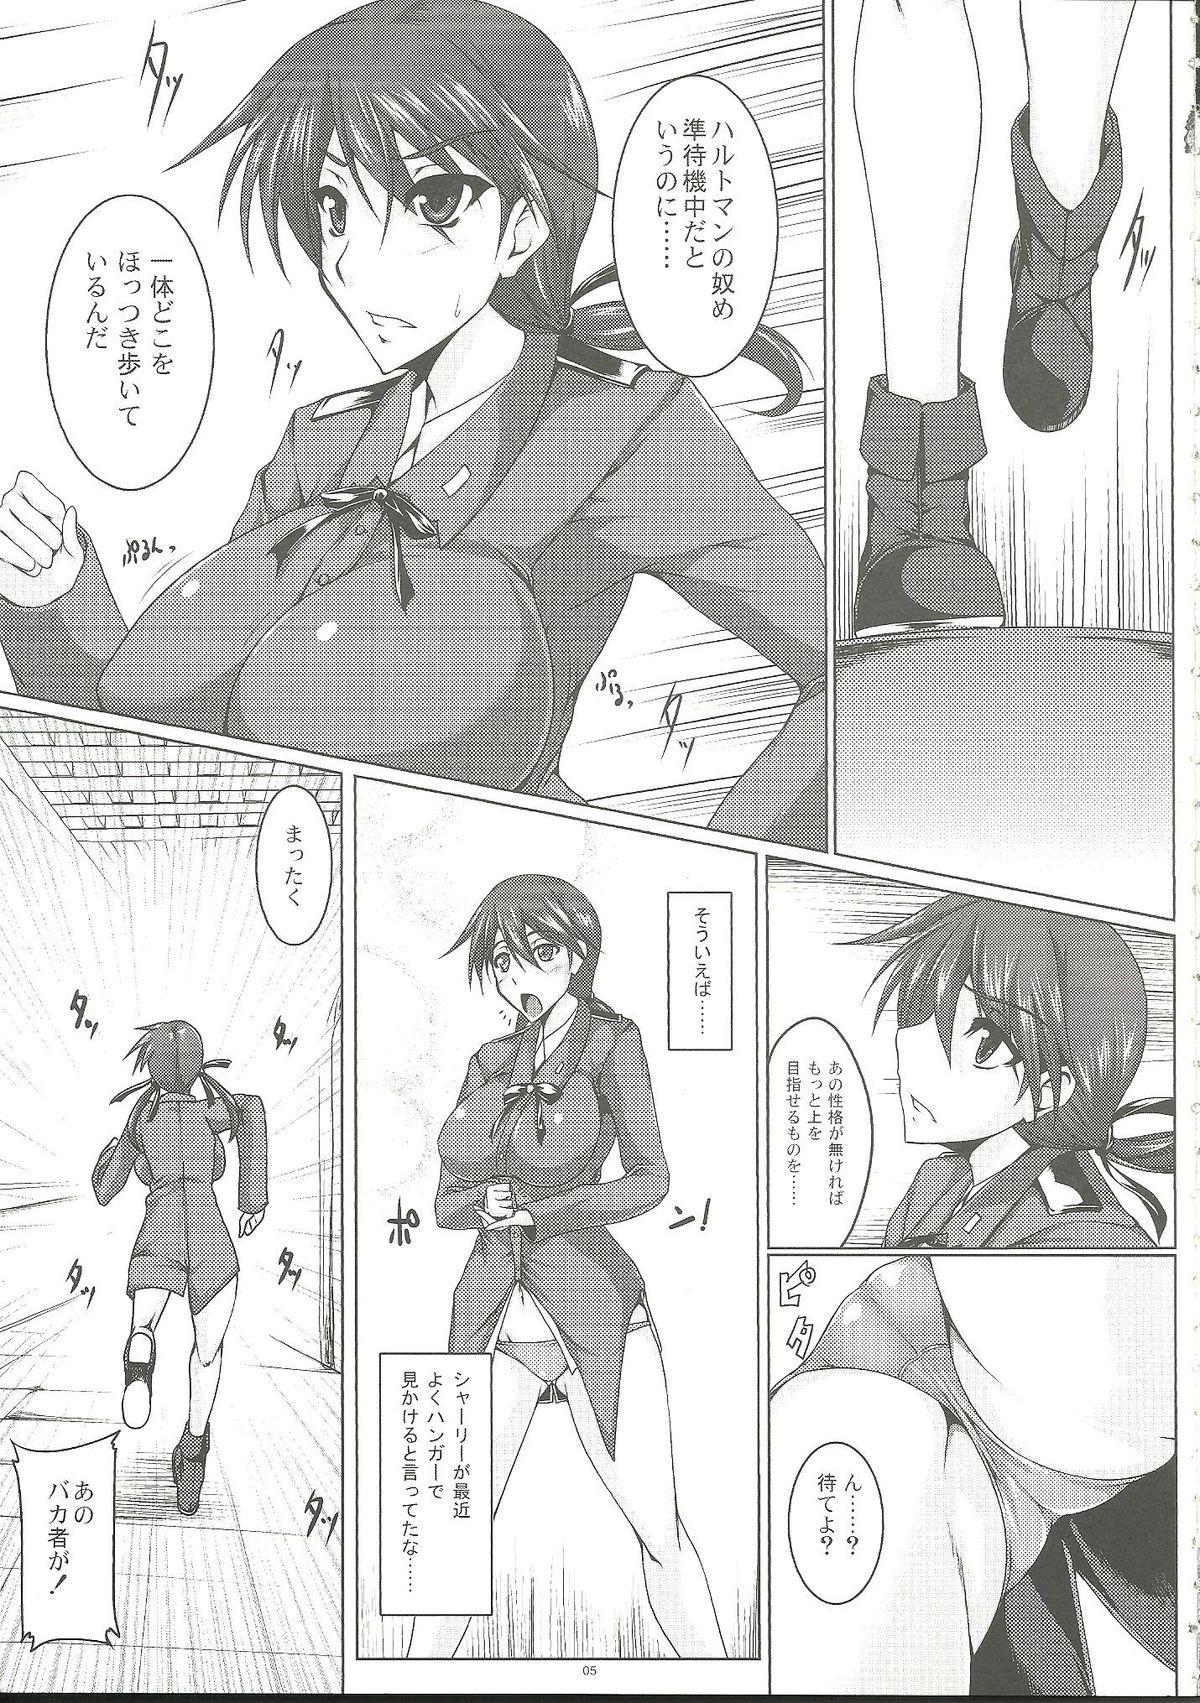 Nalgas Booby Trap - Strike witches Ex Gf - Page 4